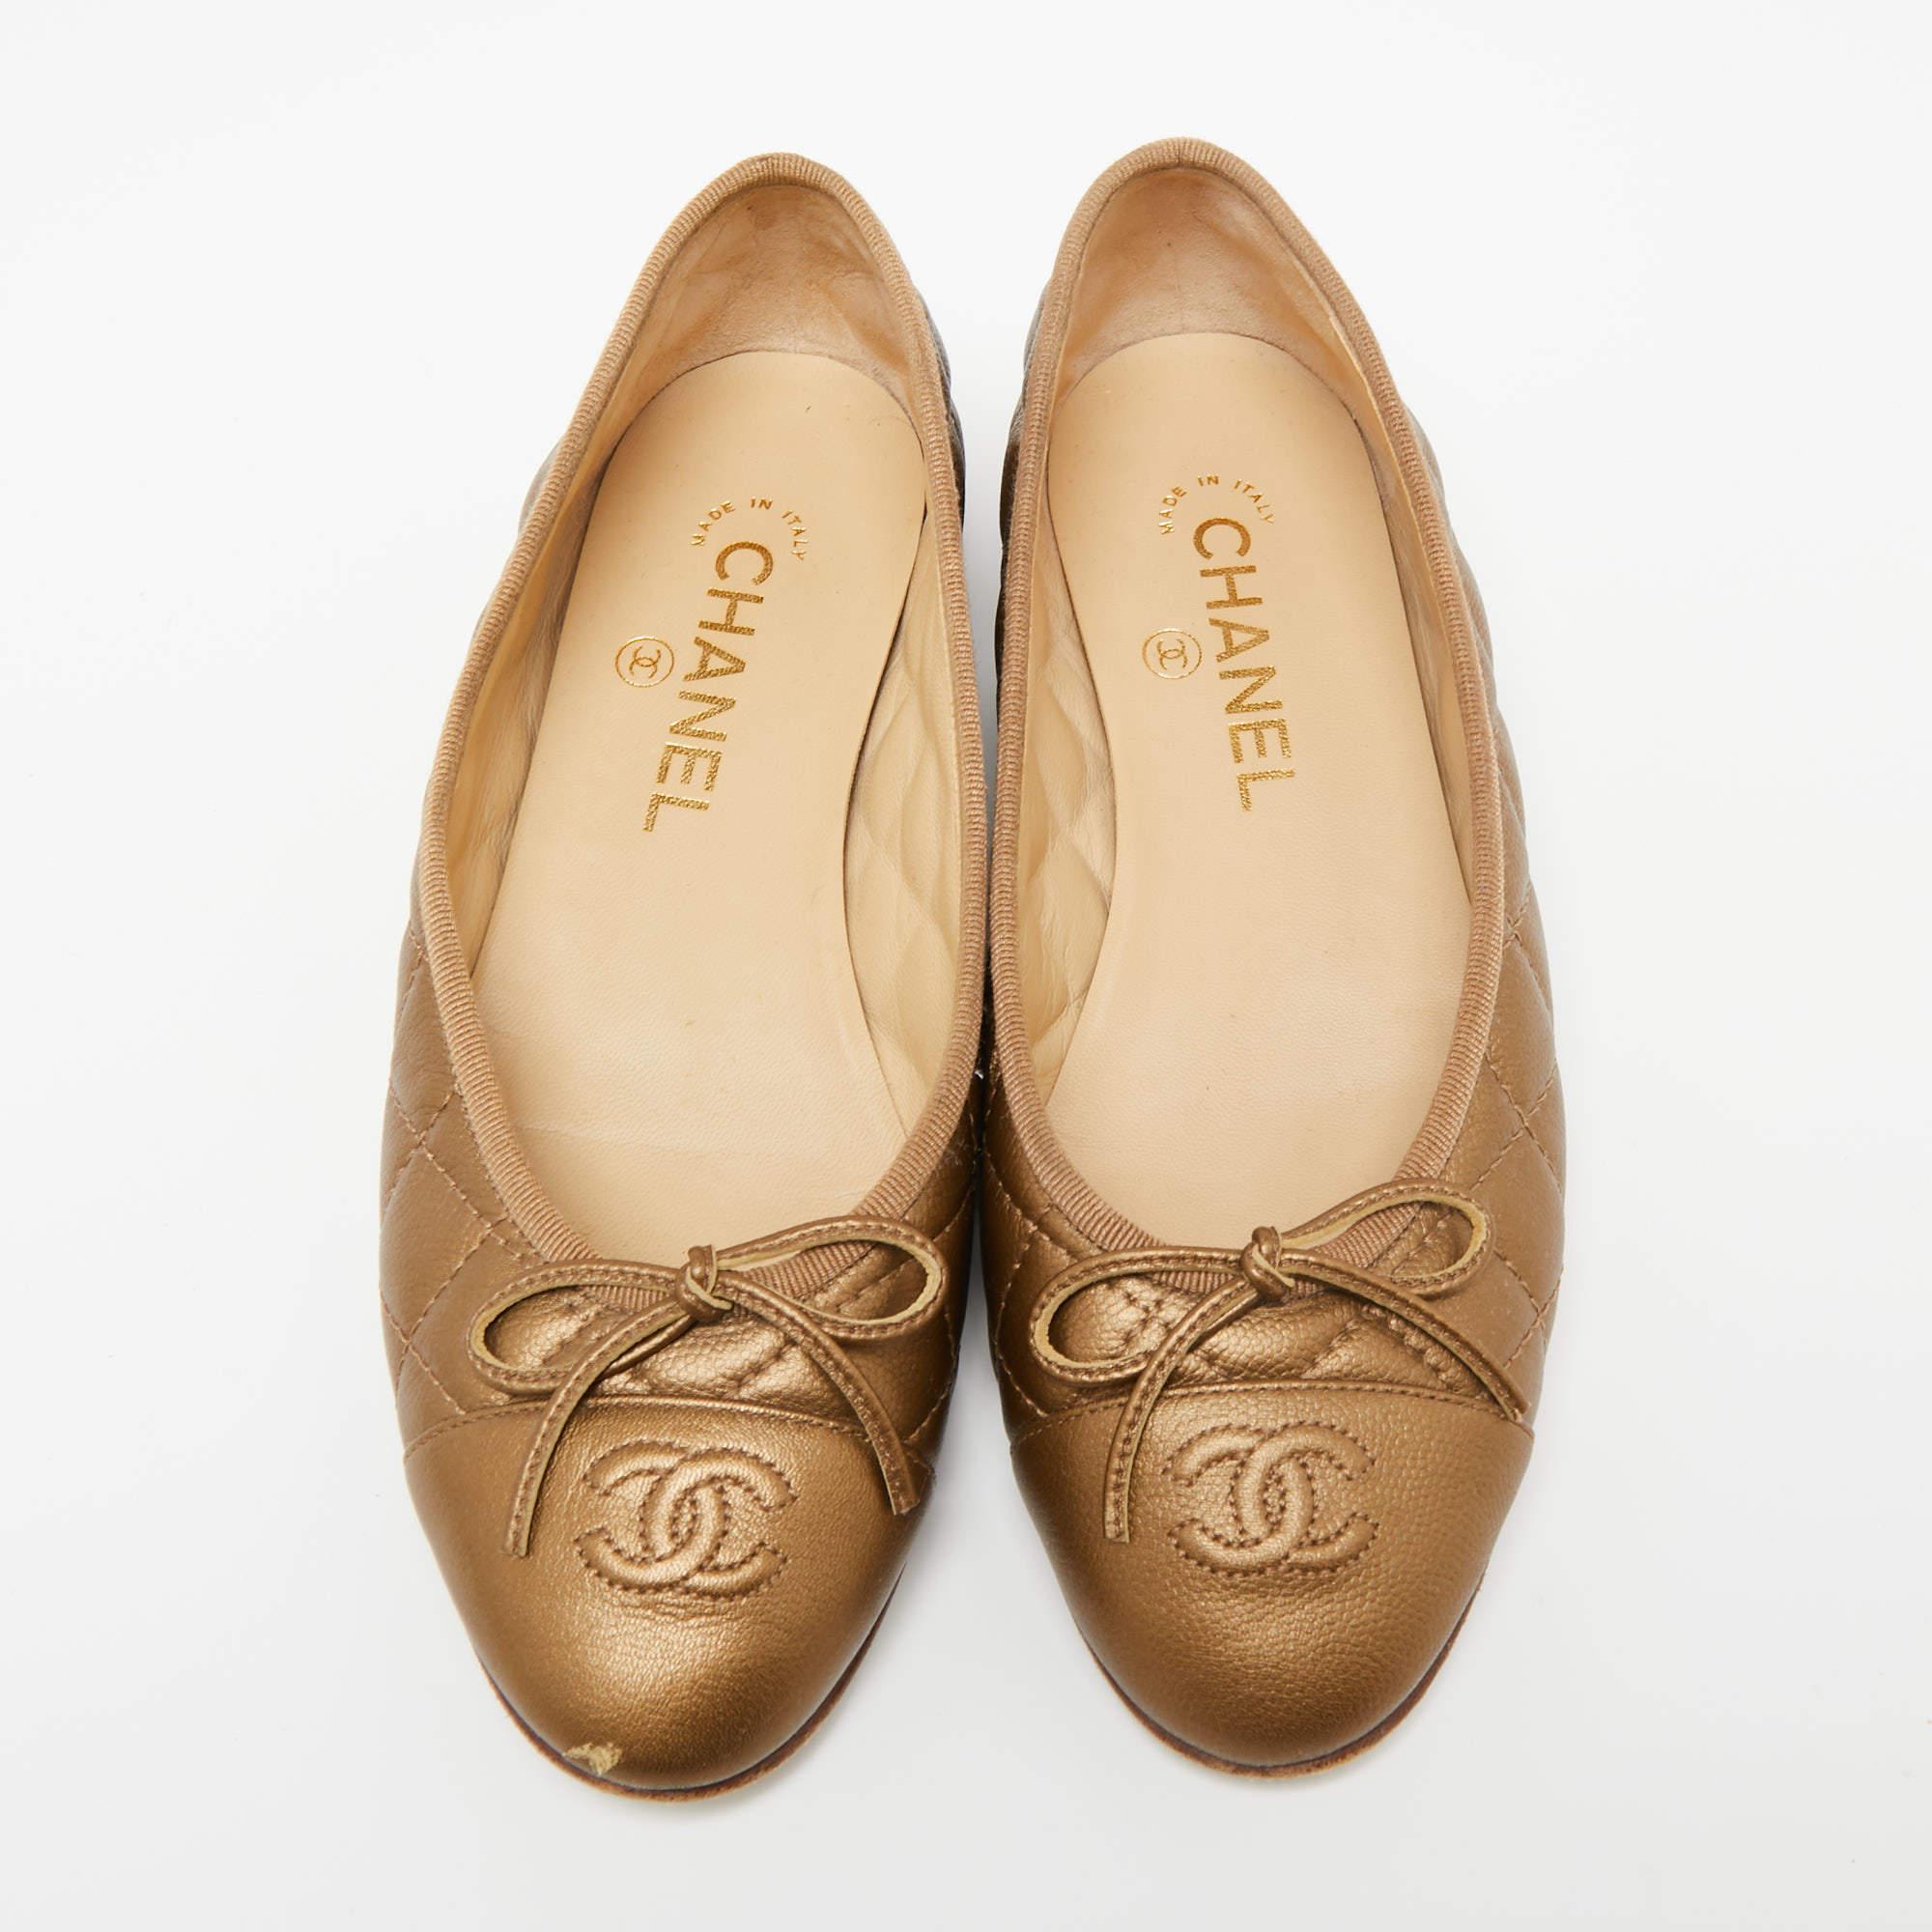 Chanel Gold Leather Bow CC Cap Toe Ballet Flats Size 37 1